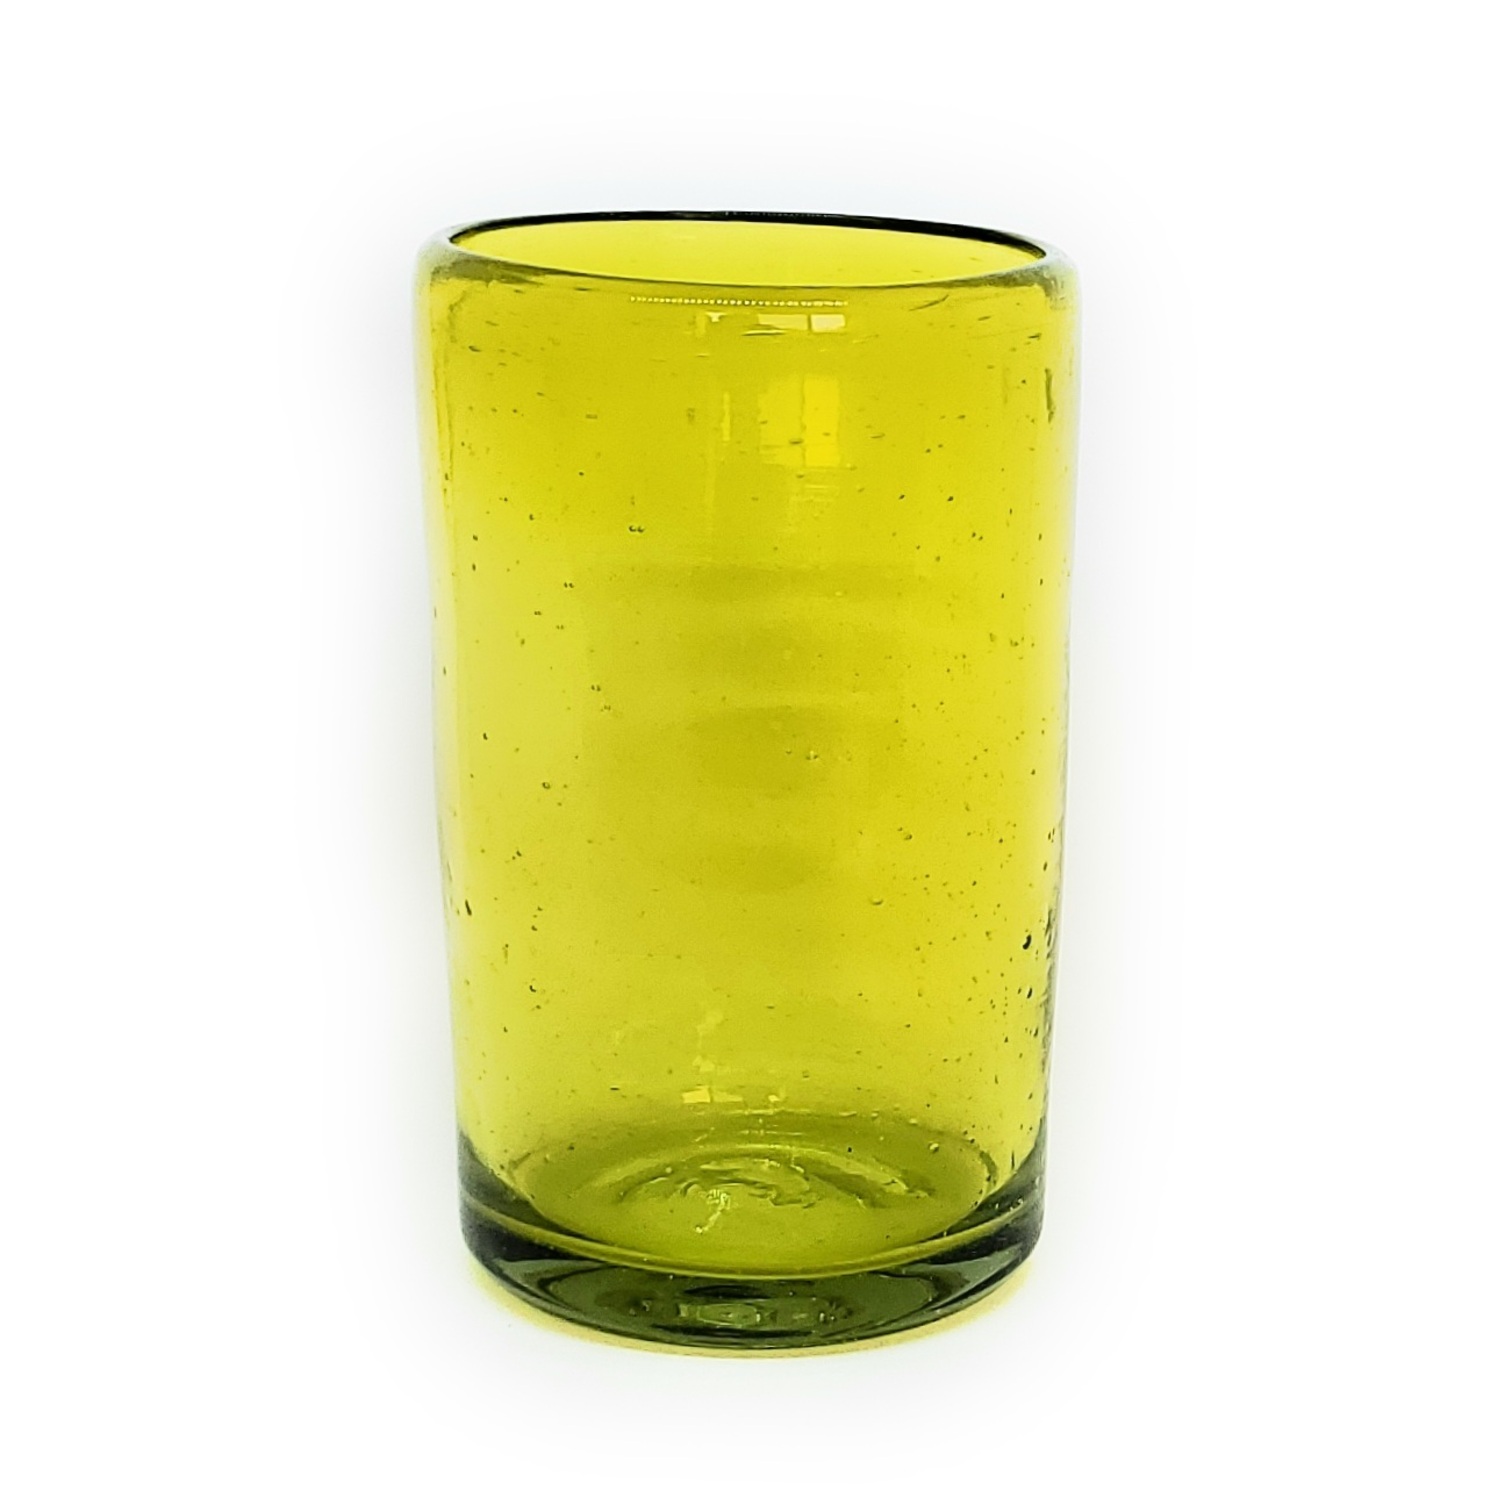 MEXICAN GLASSWARE / Solid Yellow 14 oz Drinking Glasses (set of 6) / These handcrafted glasses deliver a classic touch to your favorite drink.